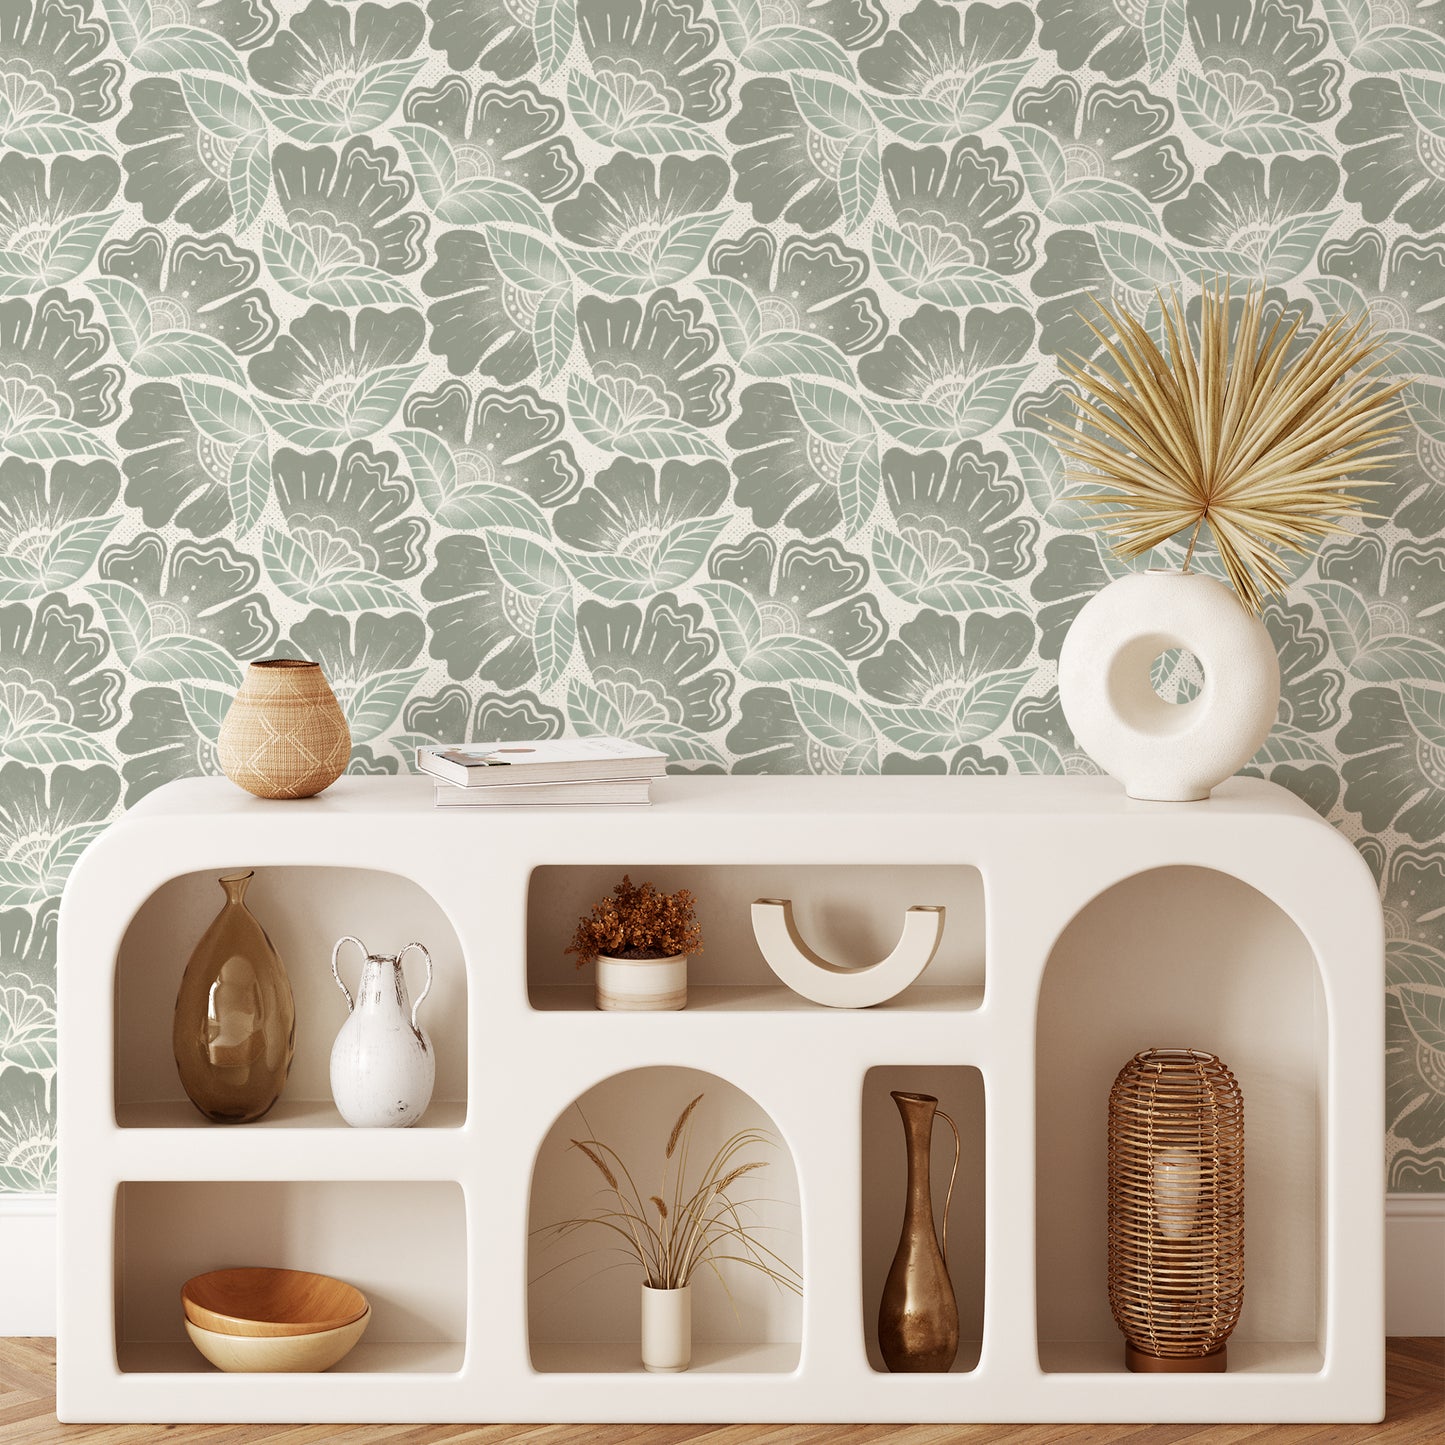 Scattered Flowers Wallpaper in Green shown in a living room.